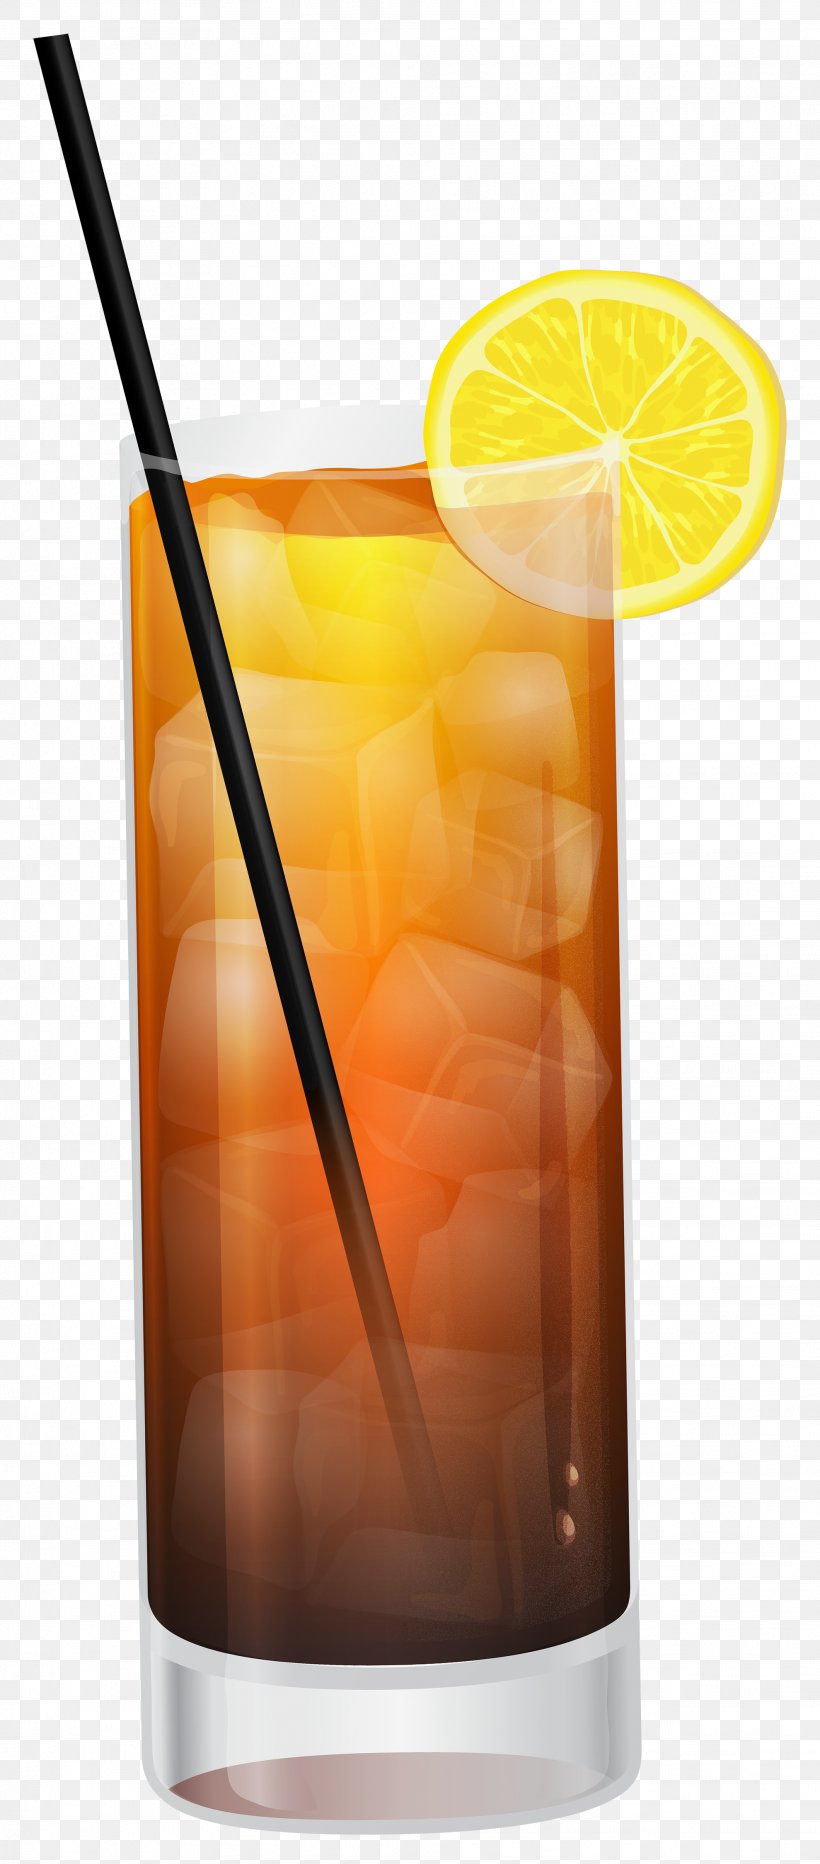 Juice Cocktail Garnish Drink Rum And Coke Cola, PNG, 1979x4500px, Juice, Cocacola, Cocacola Company, Cocacola With Lemon, Cocktail Download Free